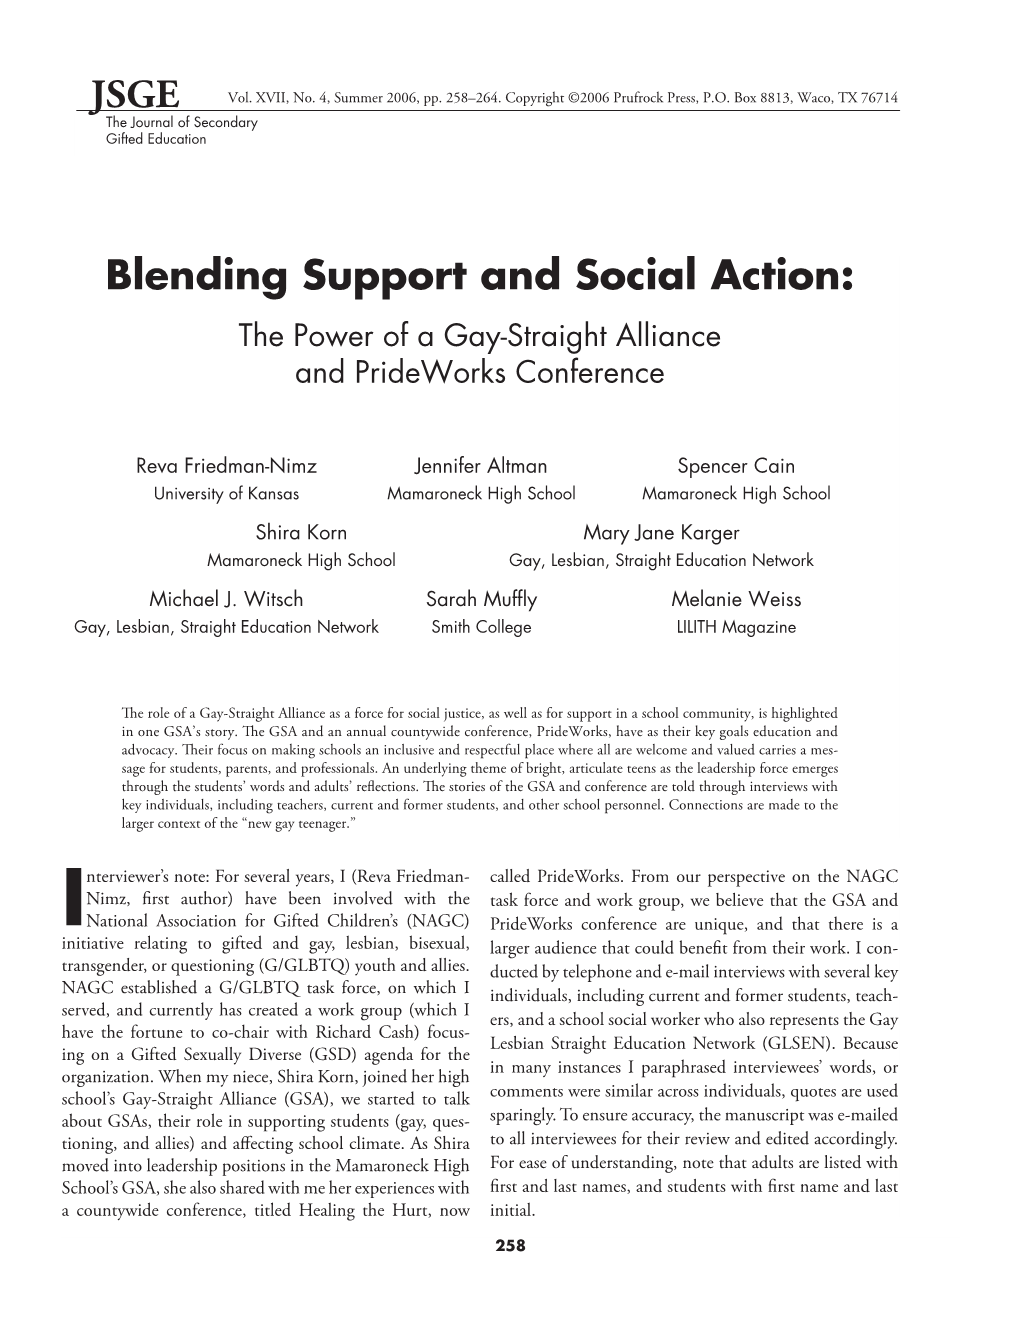 Blending Support and Social Action: the Power of a Gay-Straight Alliance and Prideworks Conference